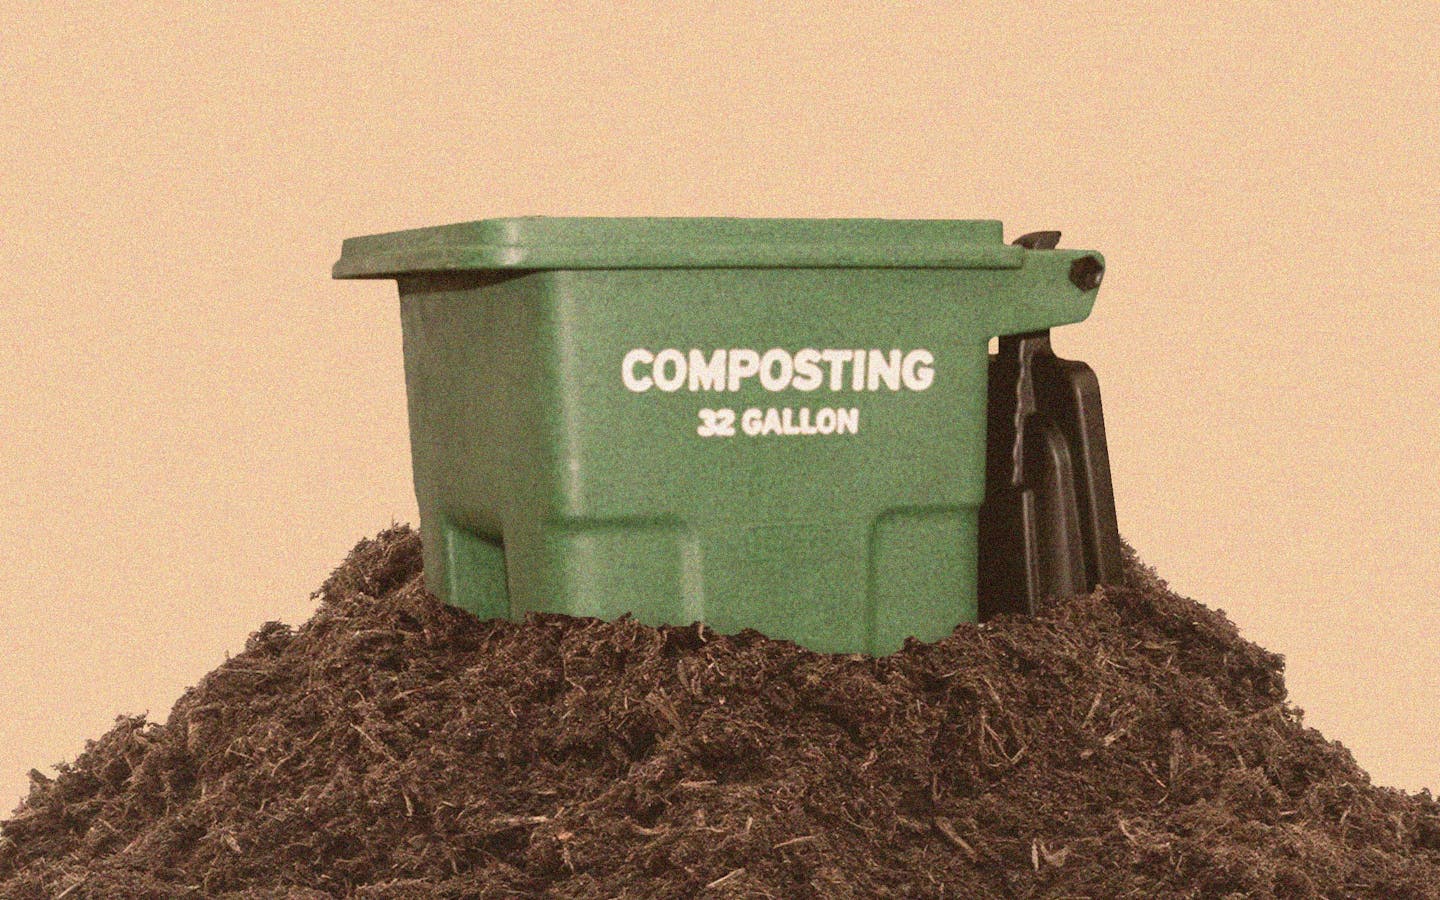 DOWN TO EARTH: The real dirt on composting